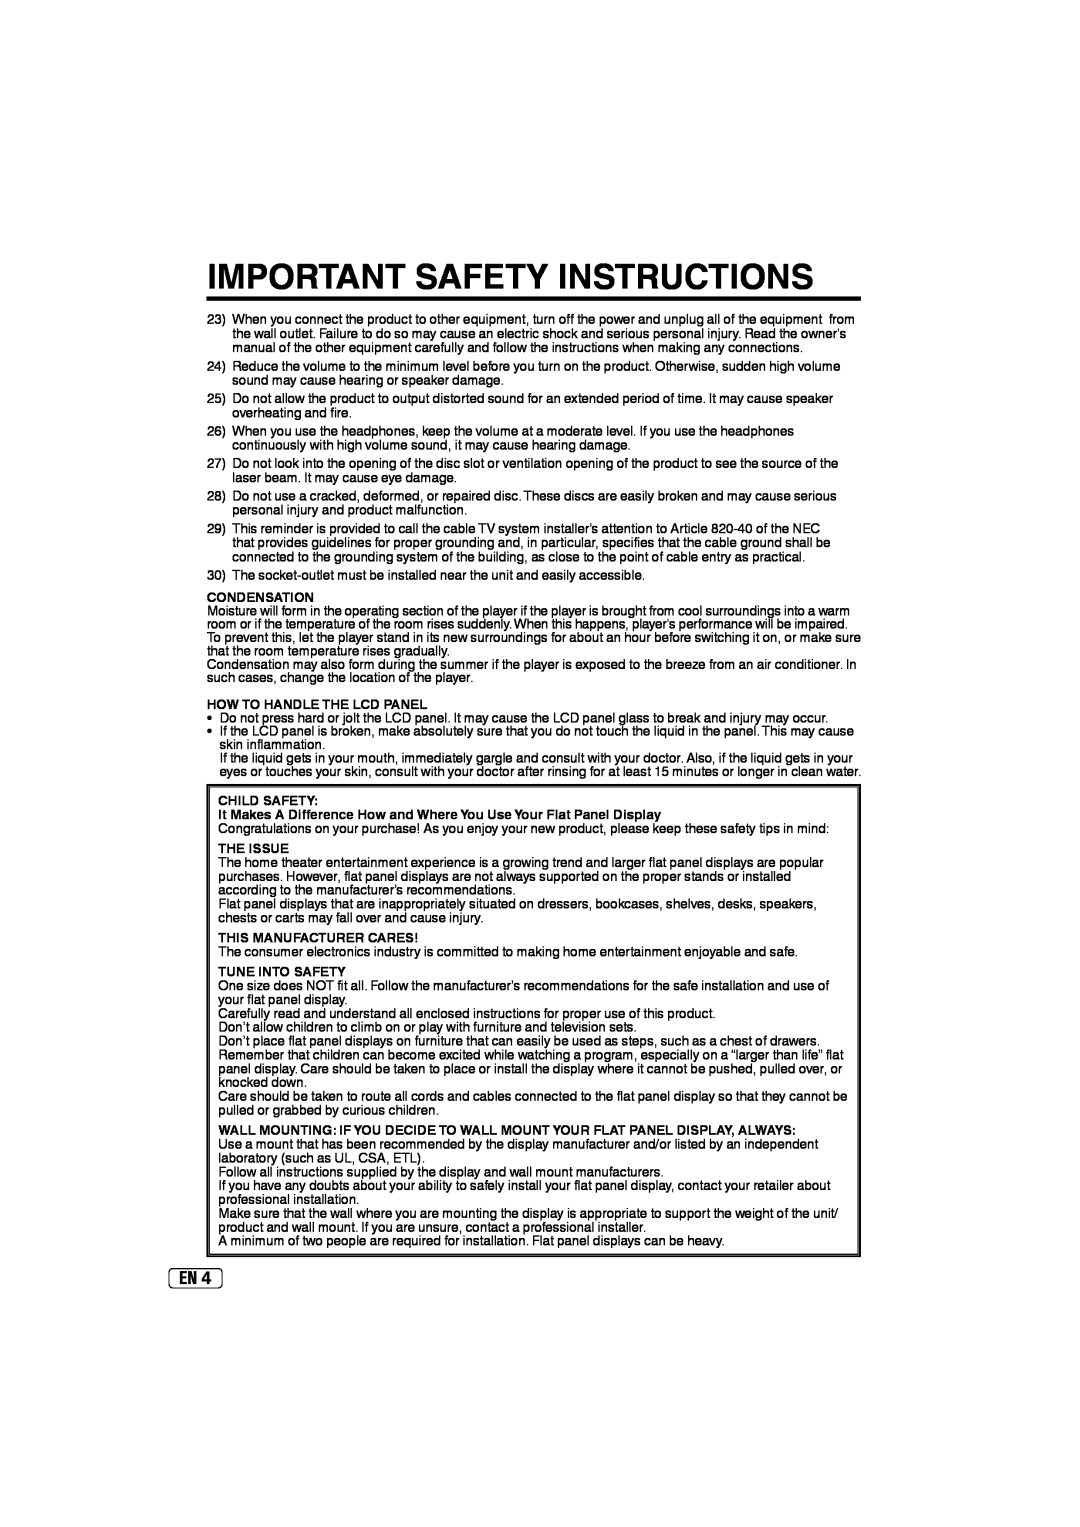 Sansui SLEDVD197 Important Safety Instructions, Condensation, How To Handle The Lcd Panel, Child Safety, The Issue 